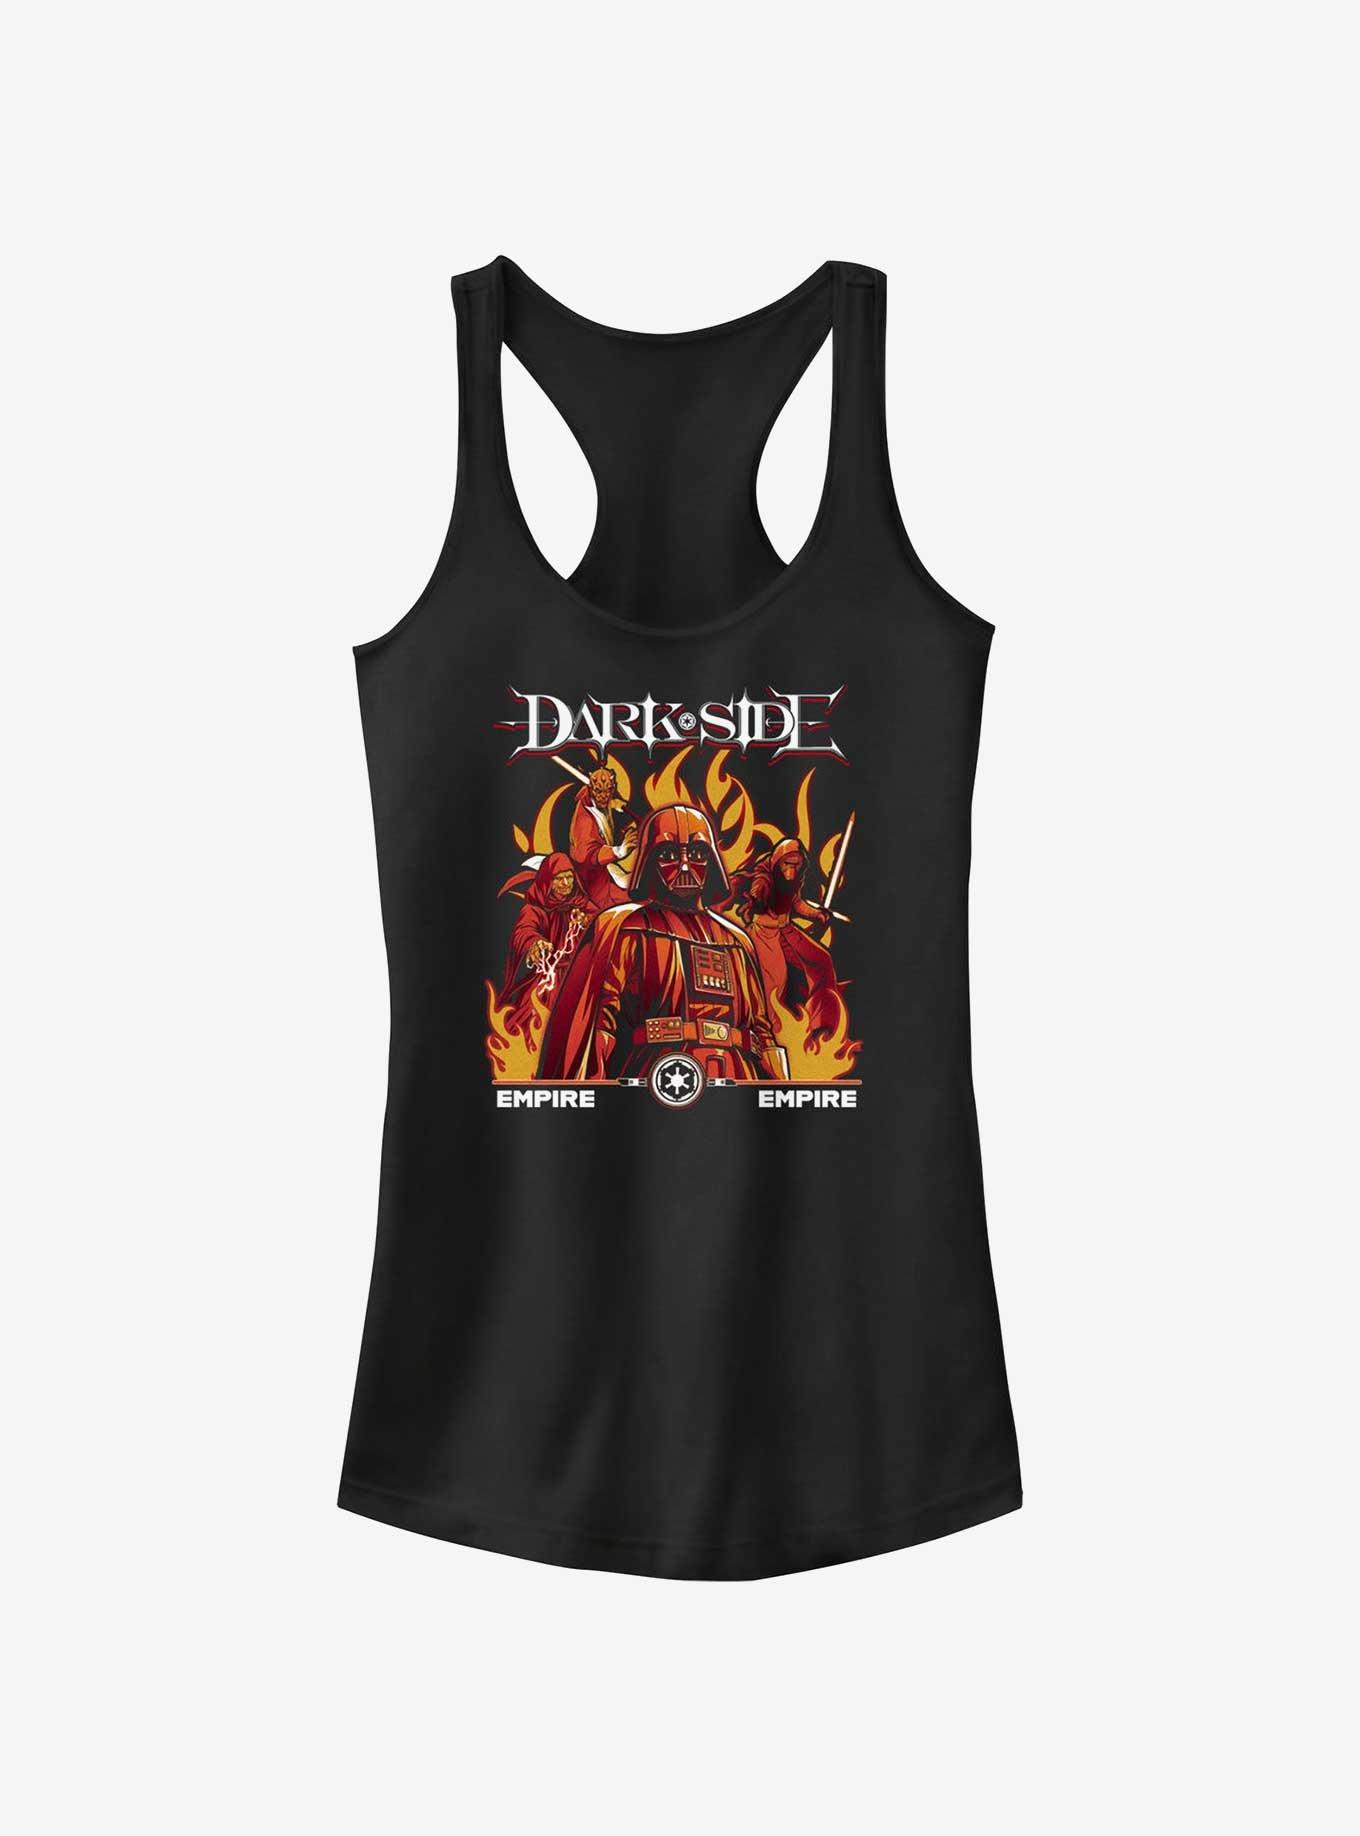 Star Wars Year of the Dark Side Empire Group Girls Tank, , hi-res